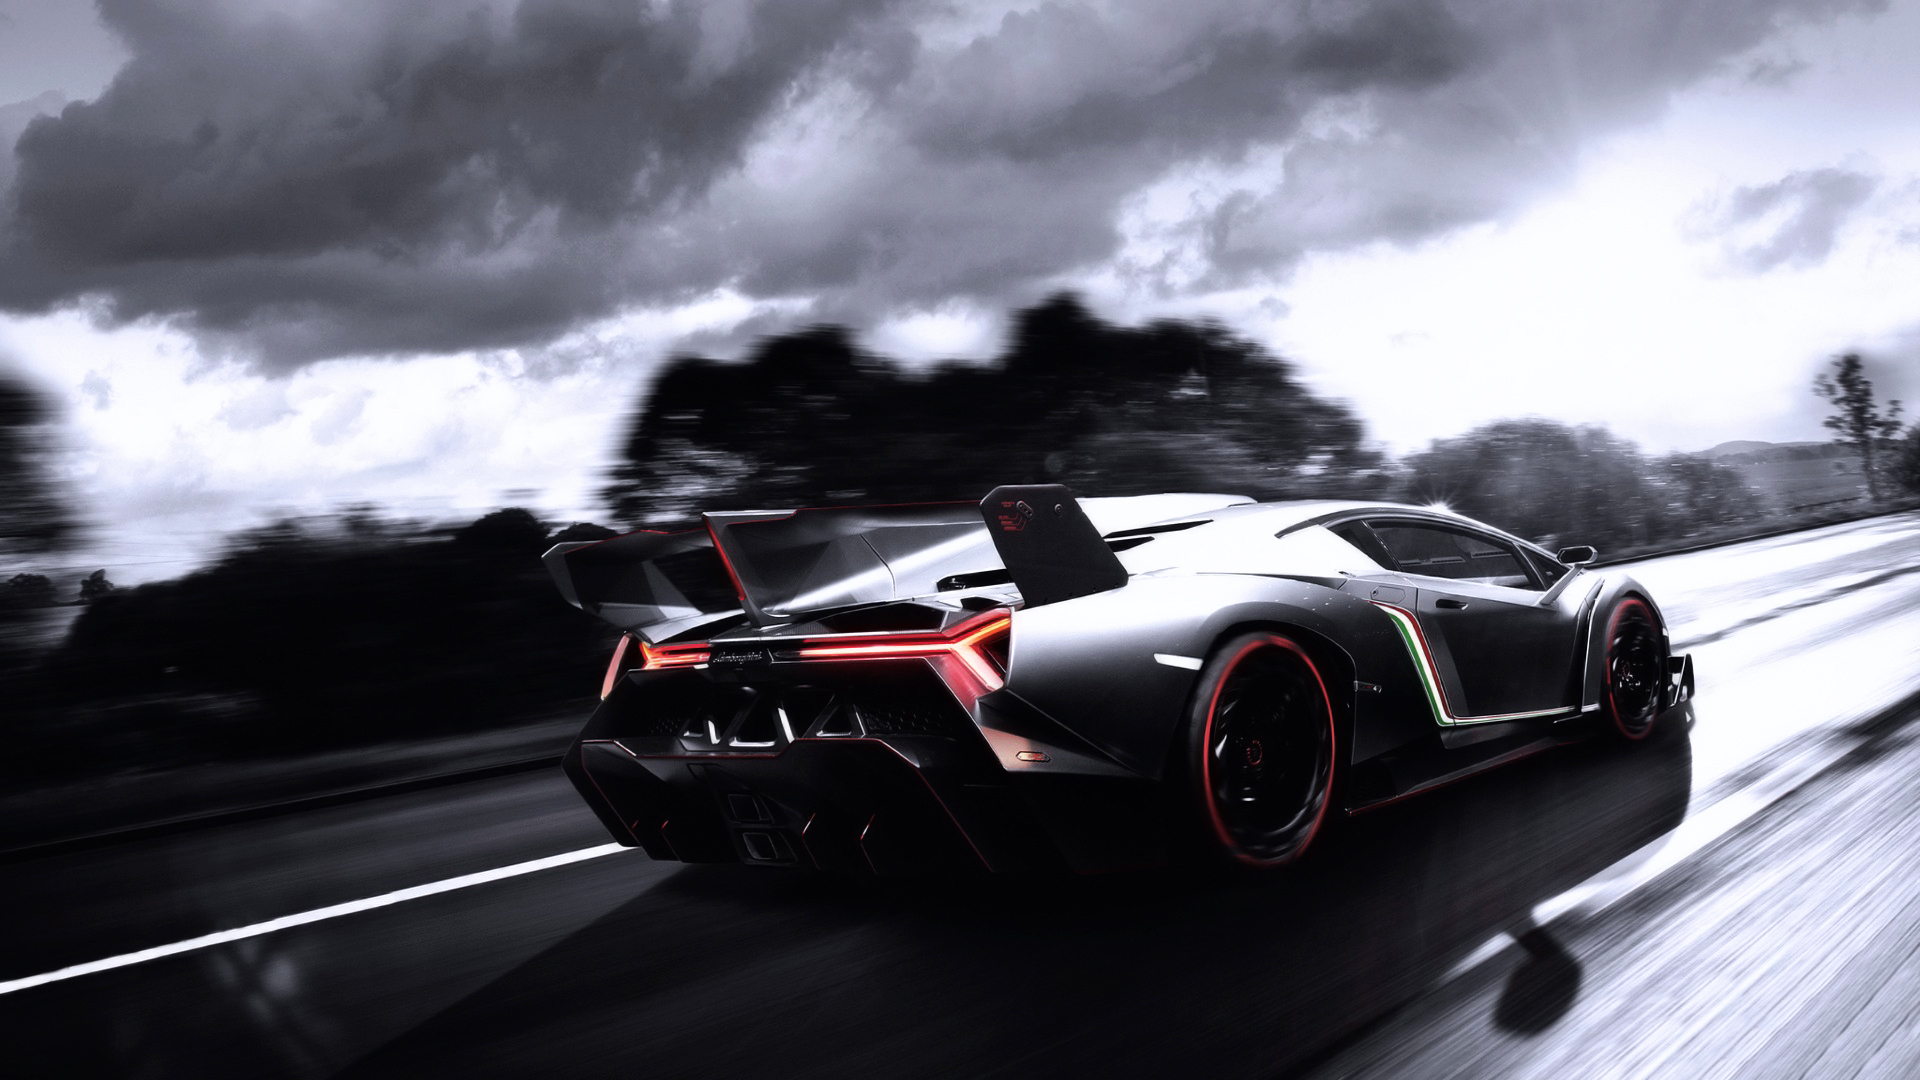 Monochrome photo of lamborghini going at high speed rear view